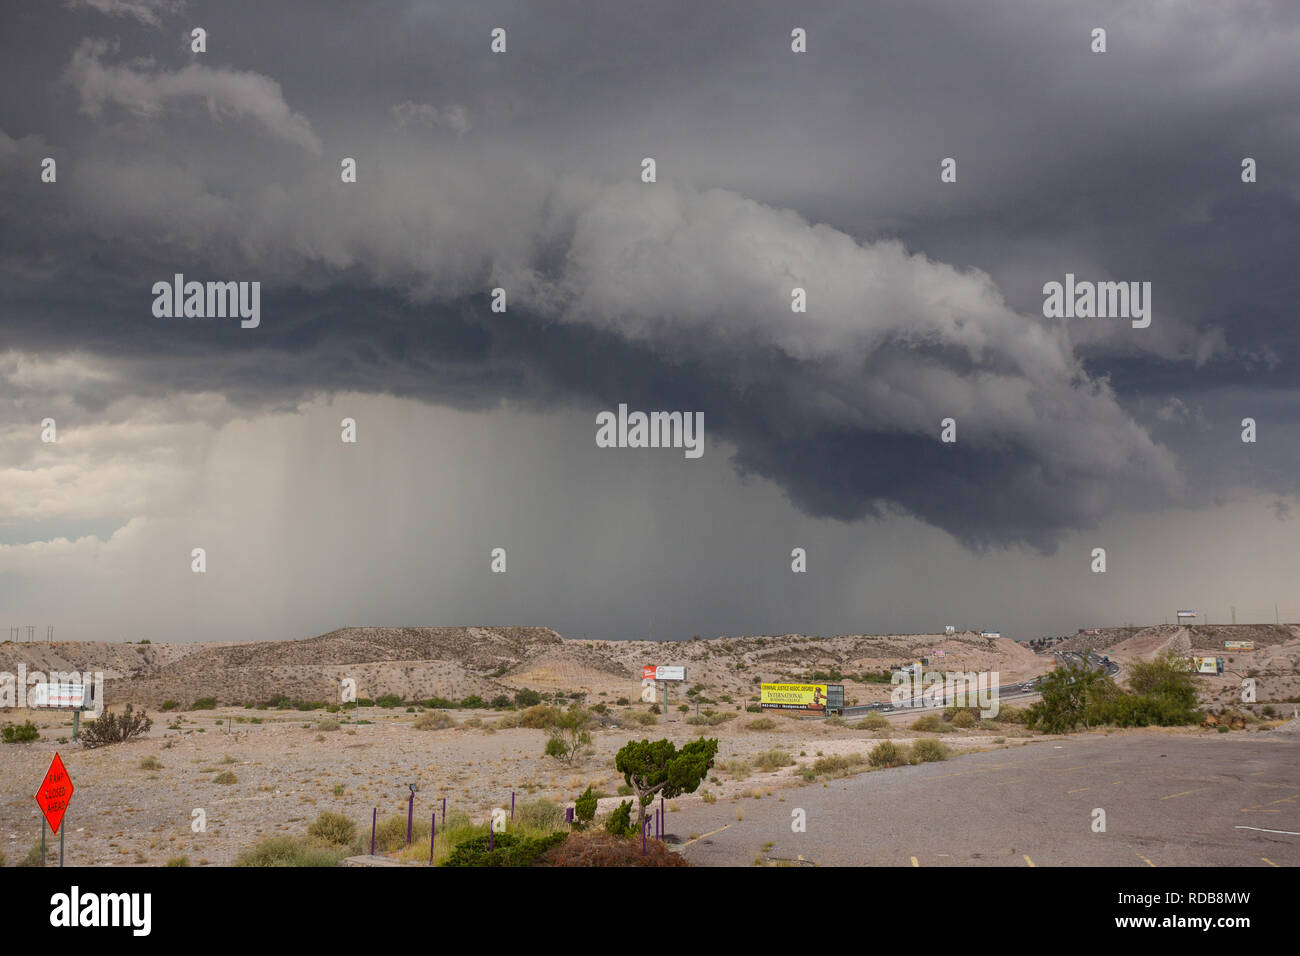 An arcus or shelf cloud develops on the edge of a severe thunderstorm in El Paso Texas Stock Photo